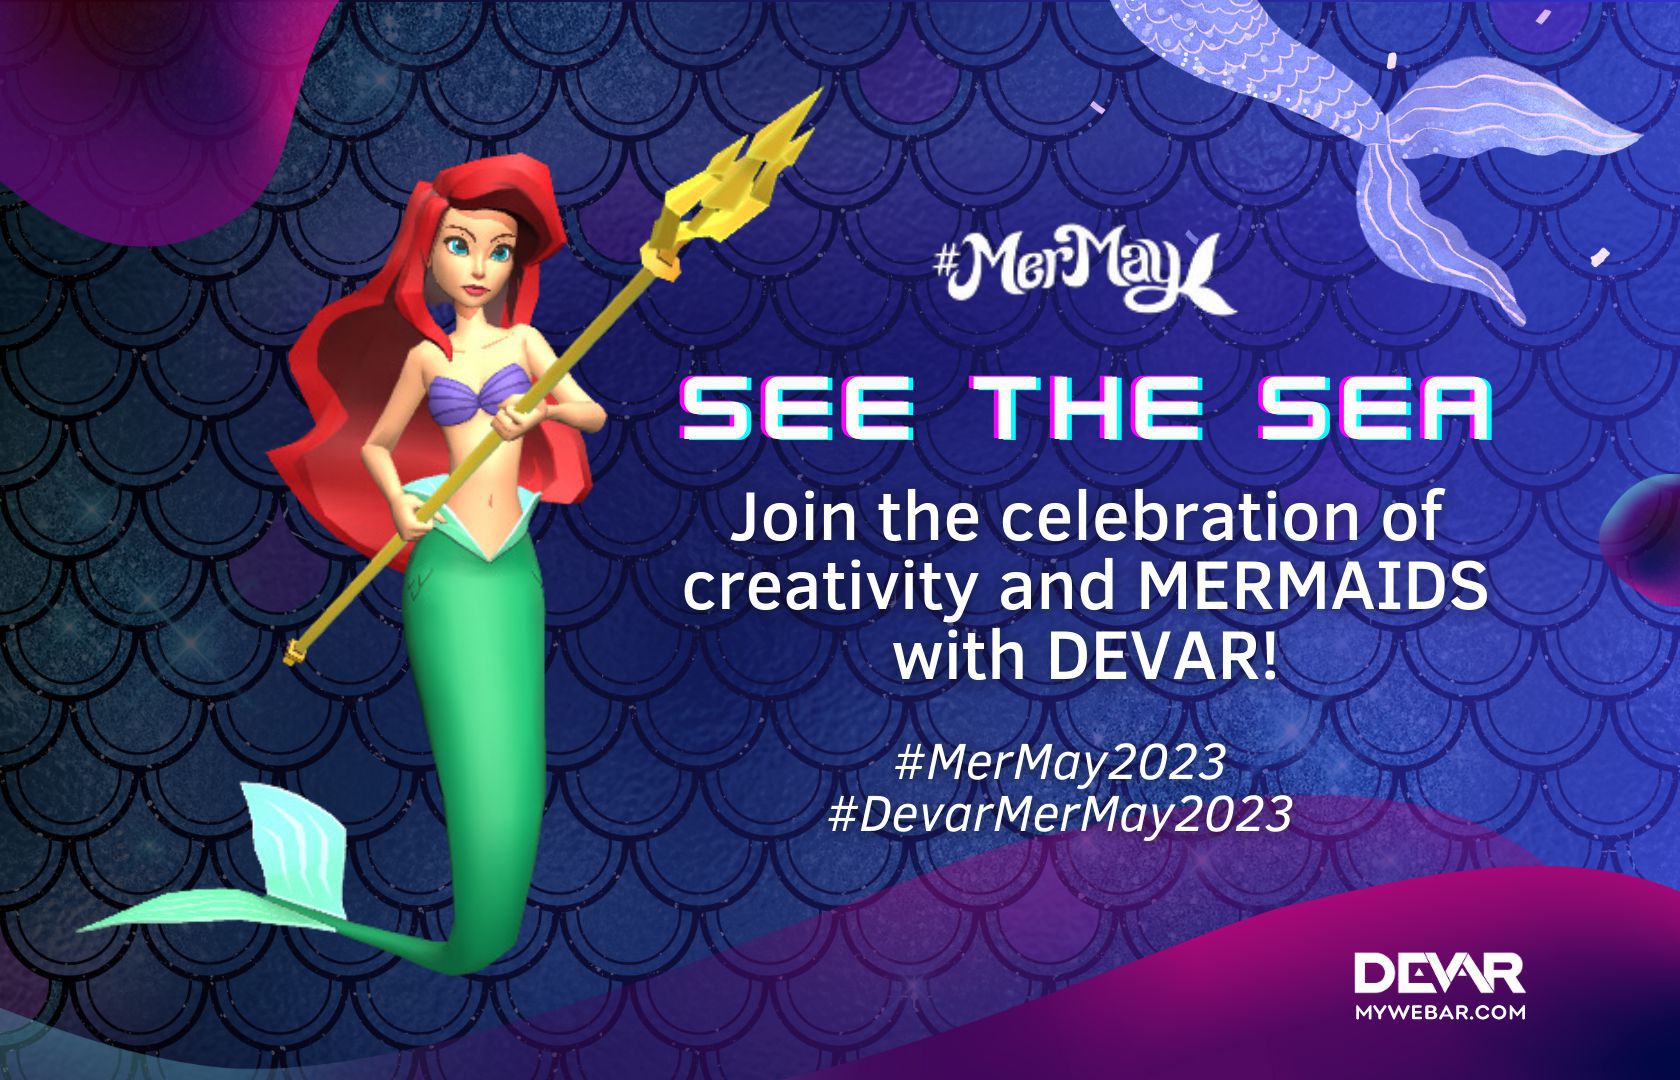 See the Sea with DEVAR!